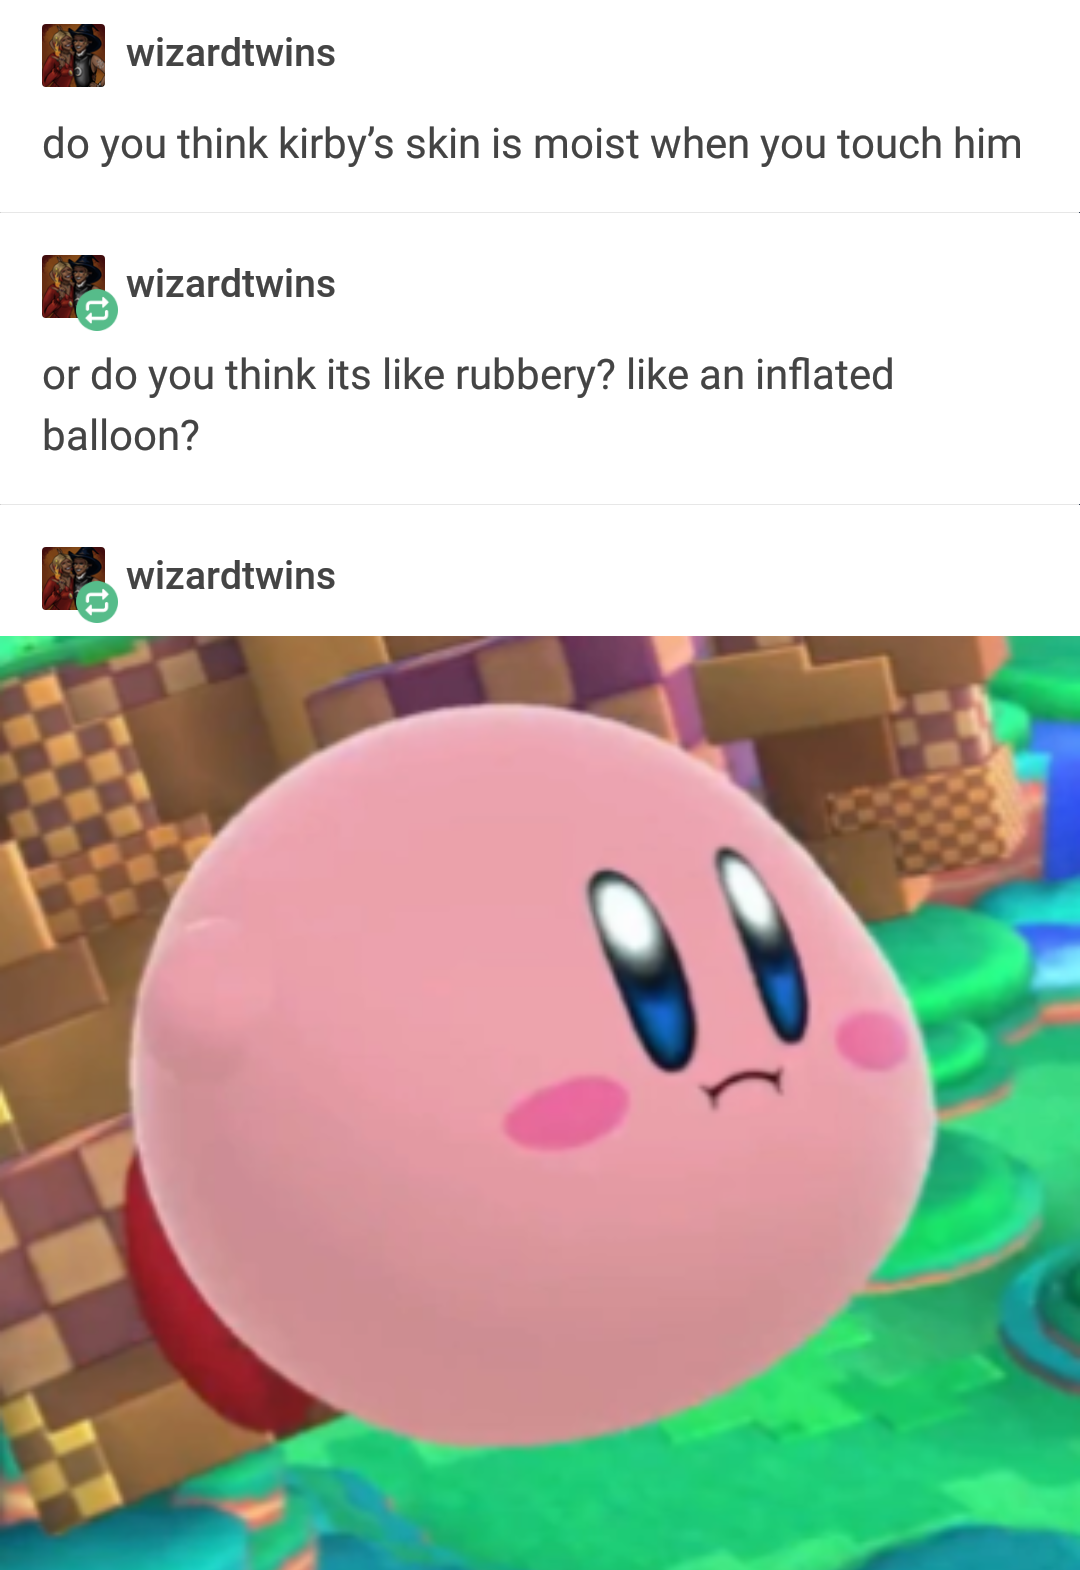 memes  - kirby think - wizardtwins do you think kirby's skin is moist when you touch him wizardtwins or do you think its rubbery? an inflated balloon? wizardtwins